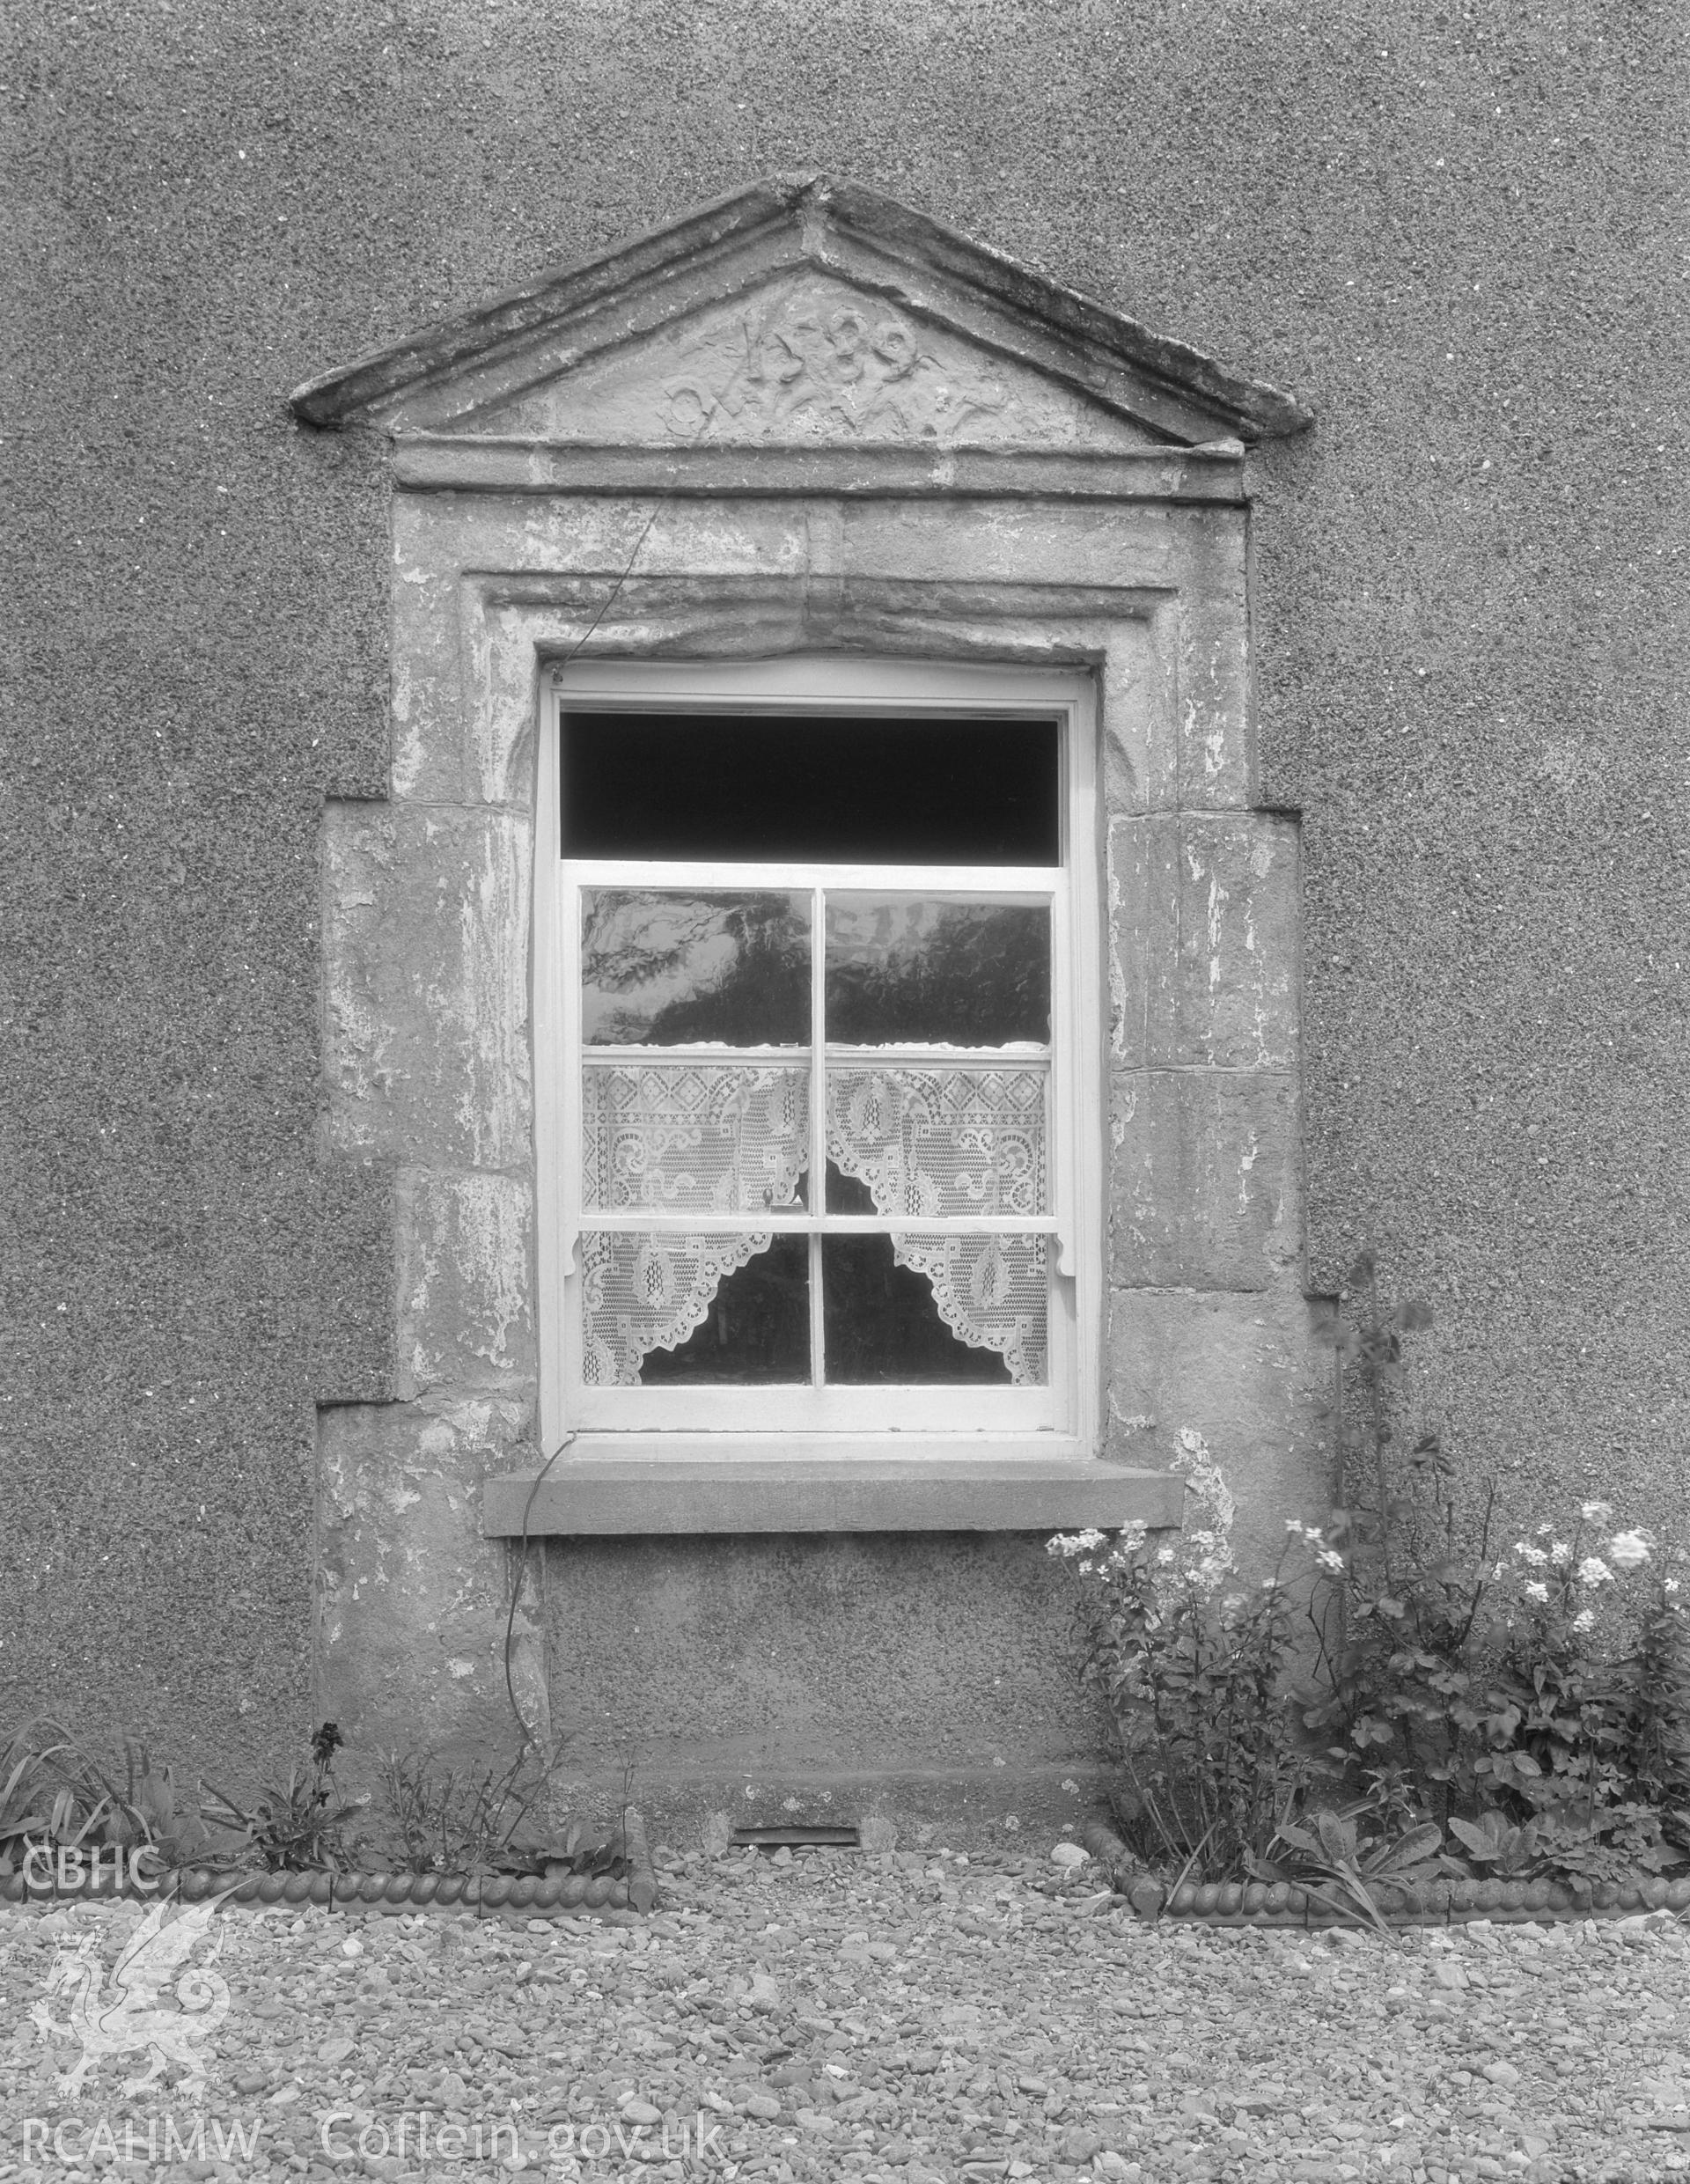 Descriptive account of Llangwyfan-Isaf, Anglesey, including investigator's notes, black and white photograph, copy of extract from RCAHMW inventory, and sketch of pediment detail.